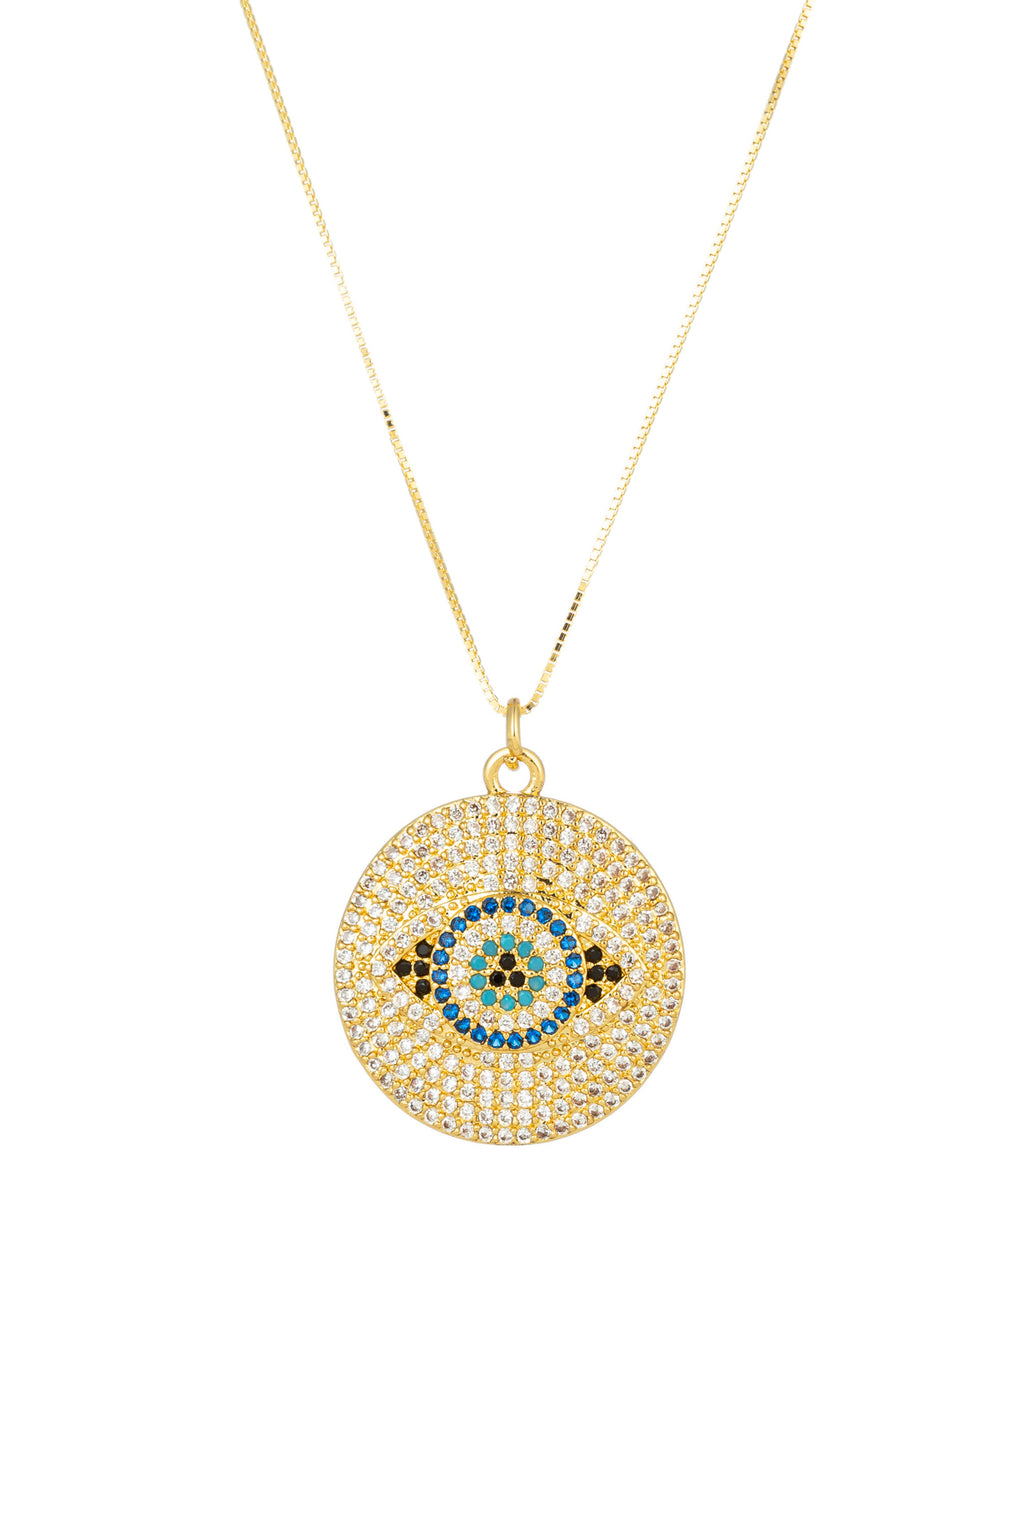 Sterling silver 14k gold plated Evil Eye necklace studded with CZ crystals.